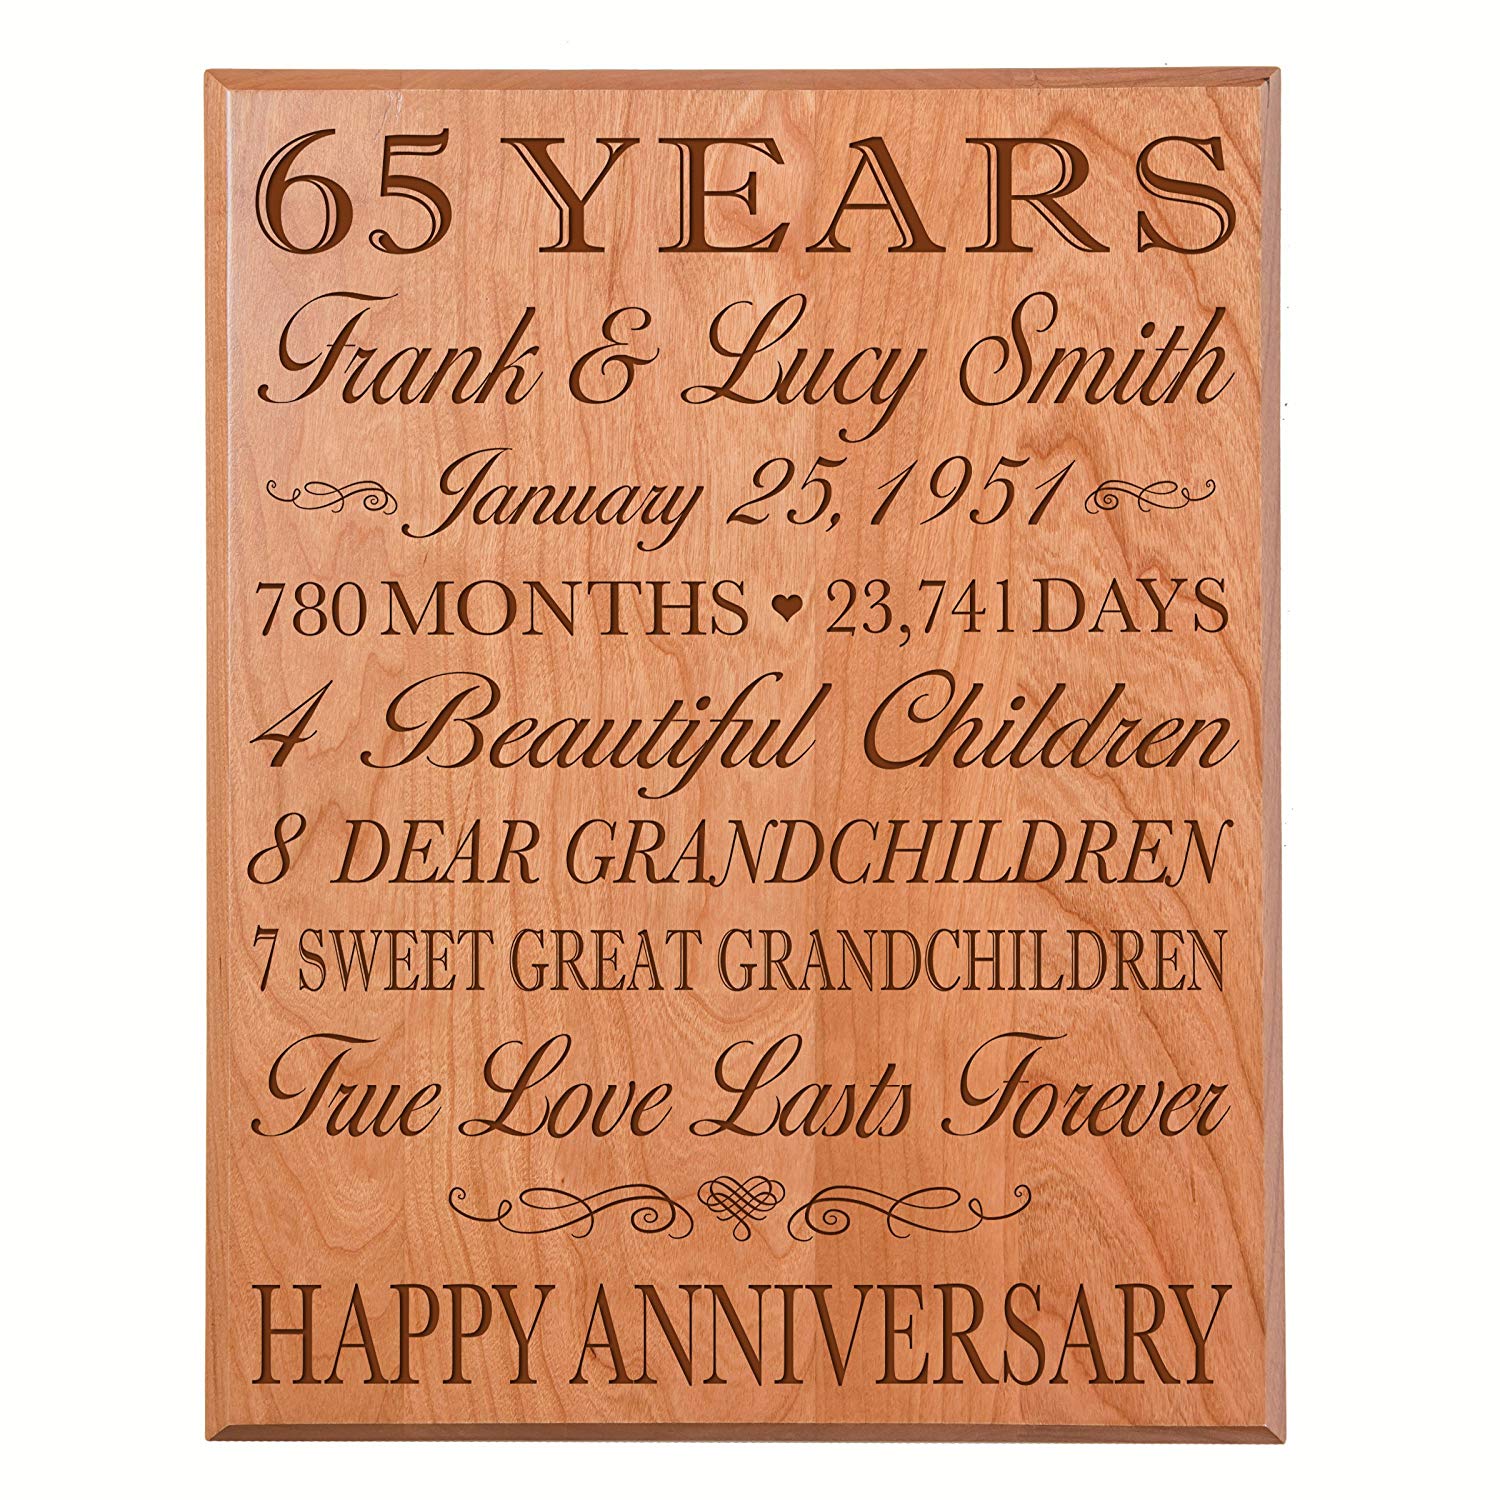 Personalized 65th Anniversary Wall Plaque - True Love Lasts Forever - LifeSong Milestones